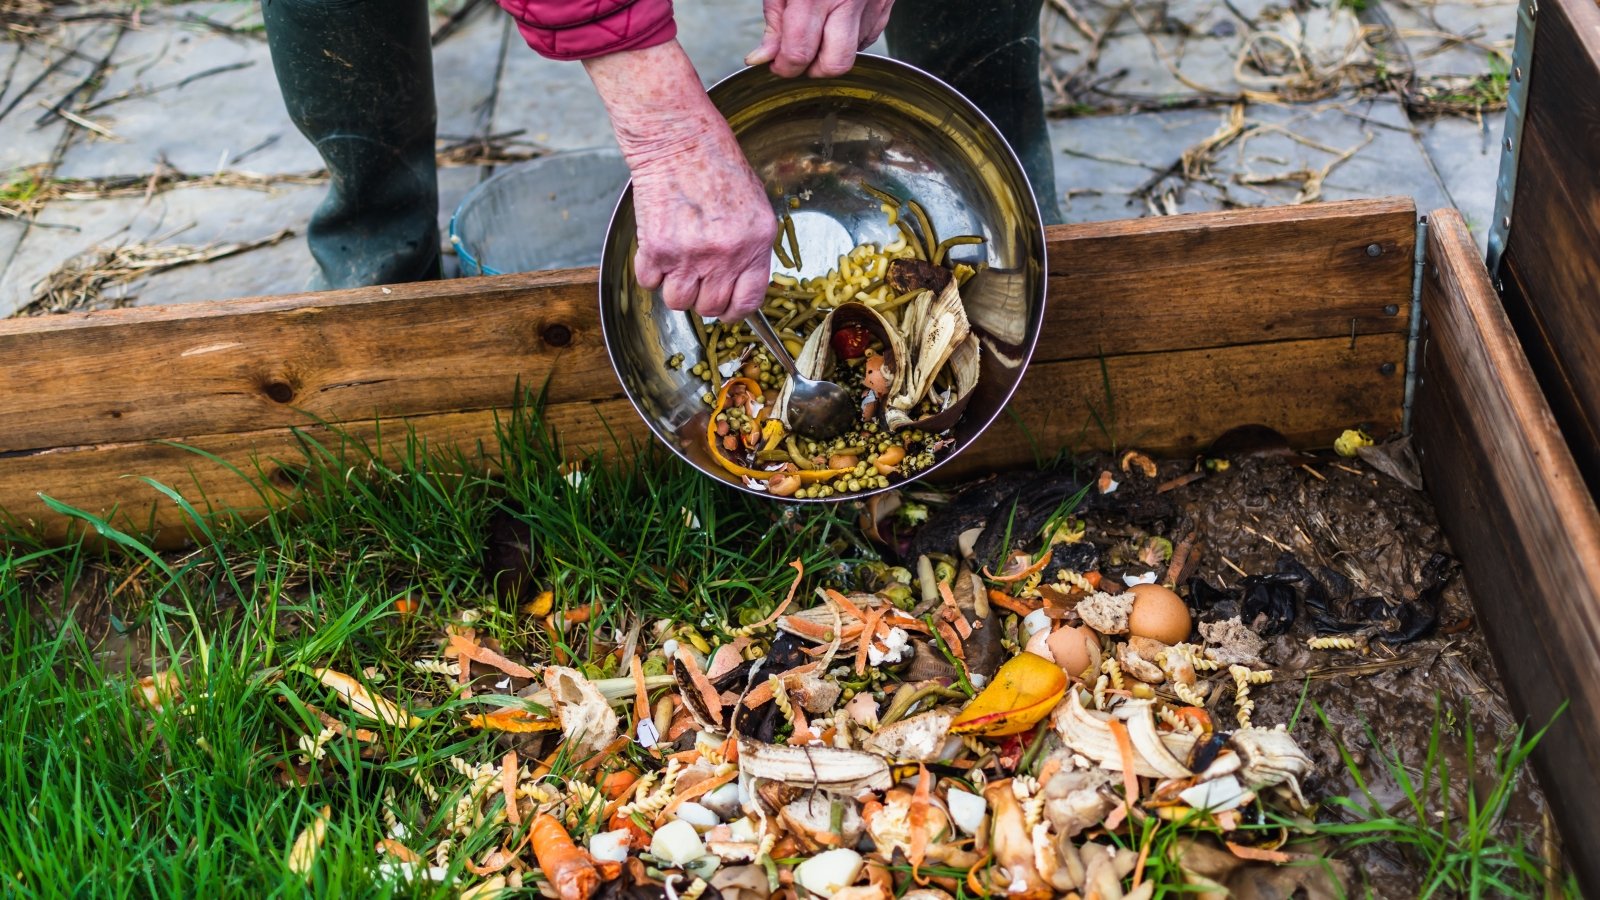 Close-up of an elderly woman pouring kitchen waste from an iron bowl into a large wooden composter bin.